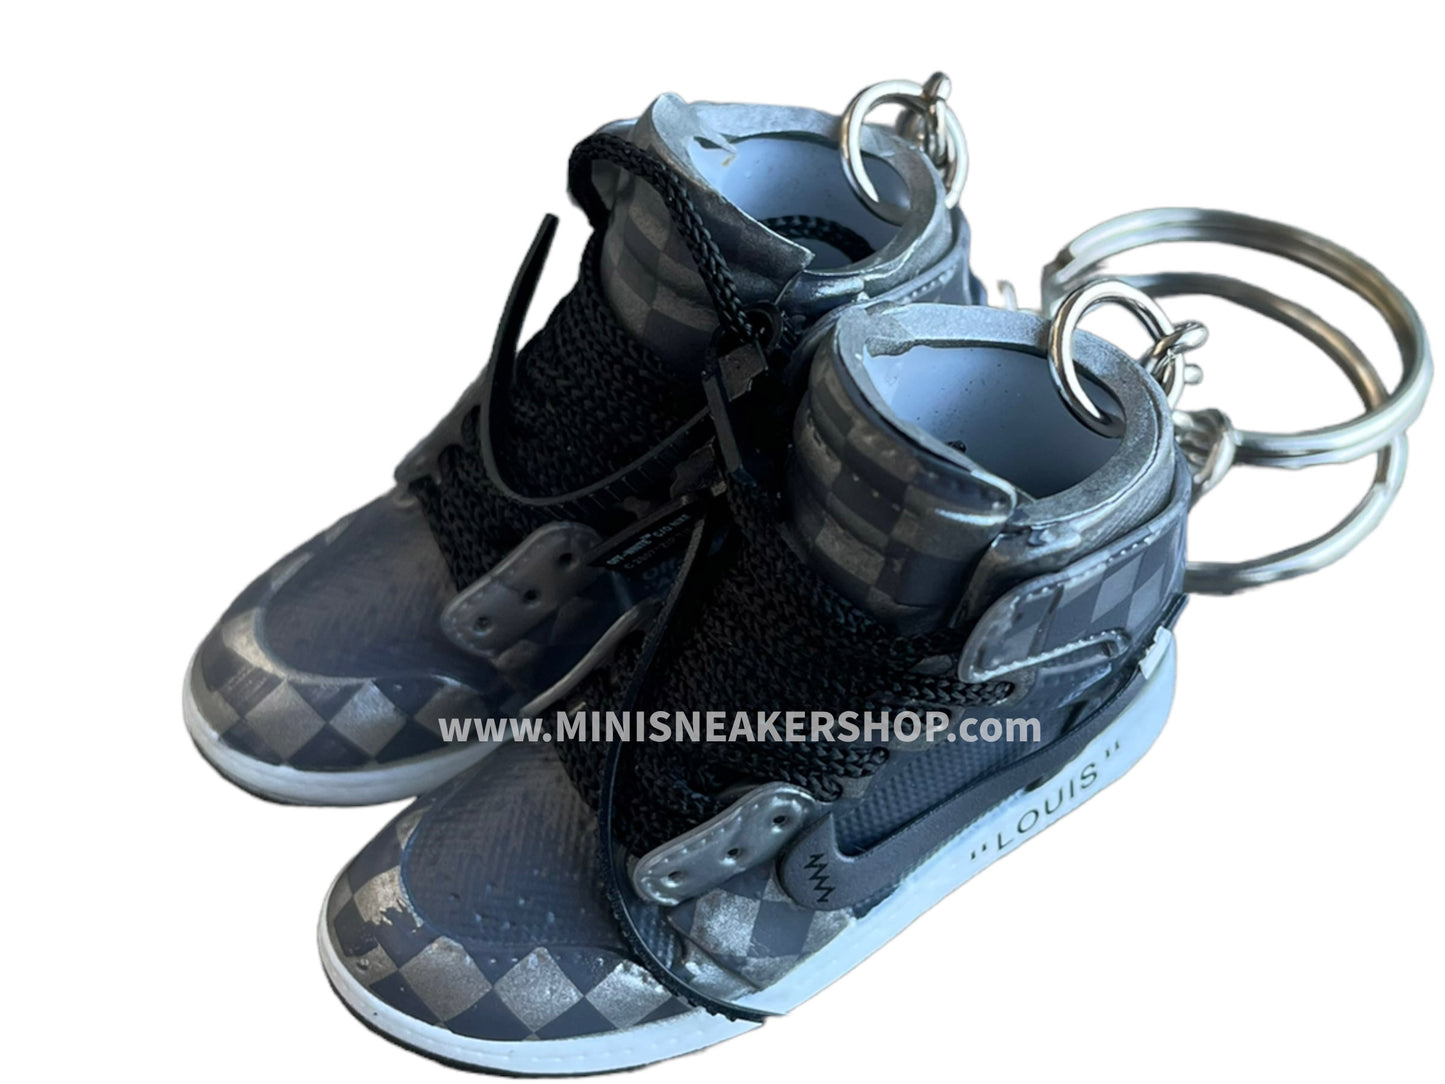 Mini sneaker keychain 3D HQ AJ1 x OW x LV inspired black- EXCLUSIVE - Limited edition